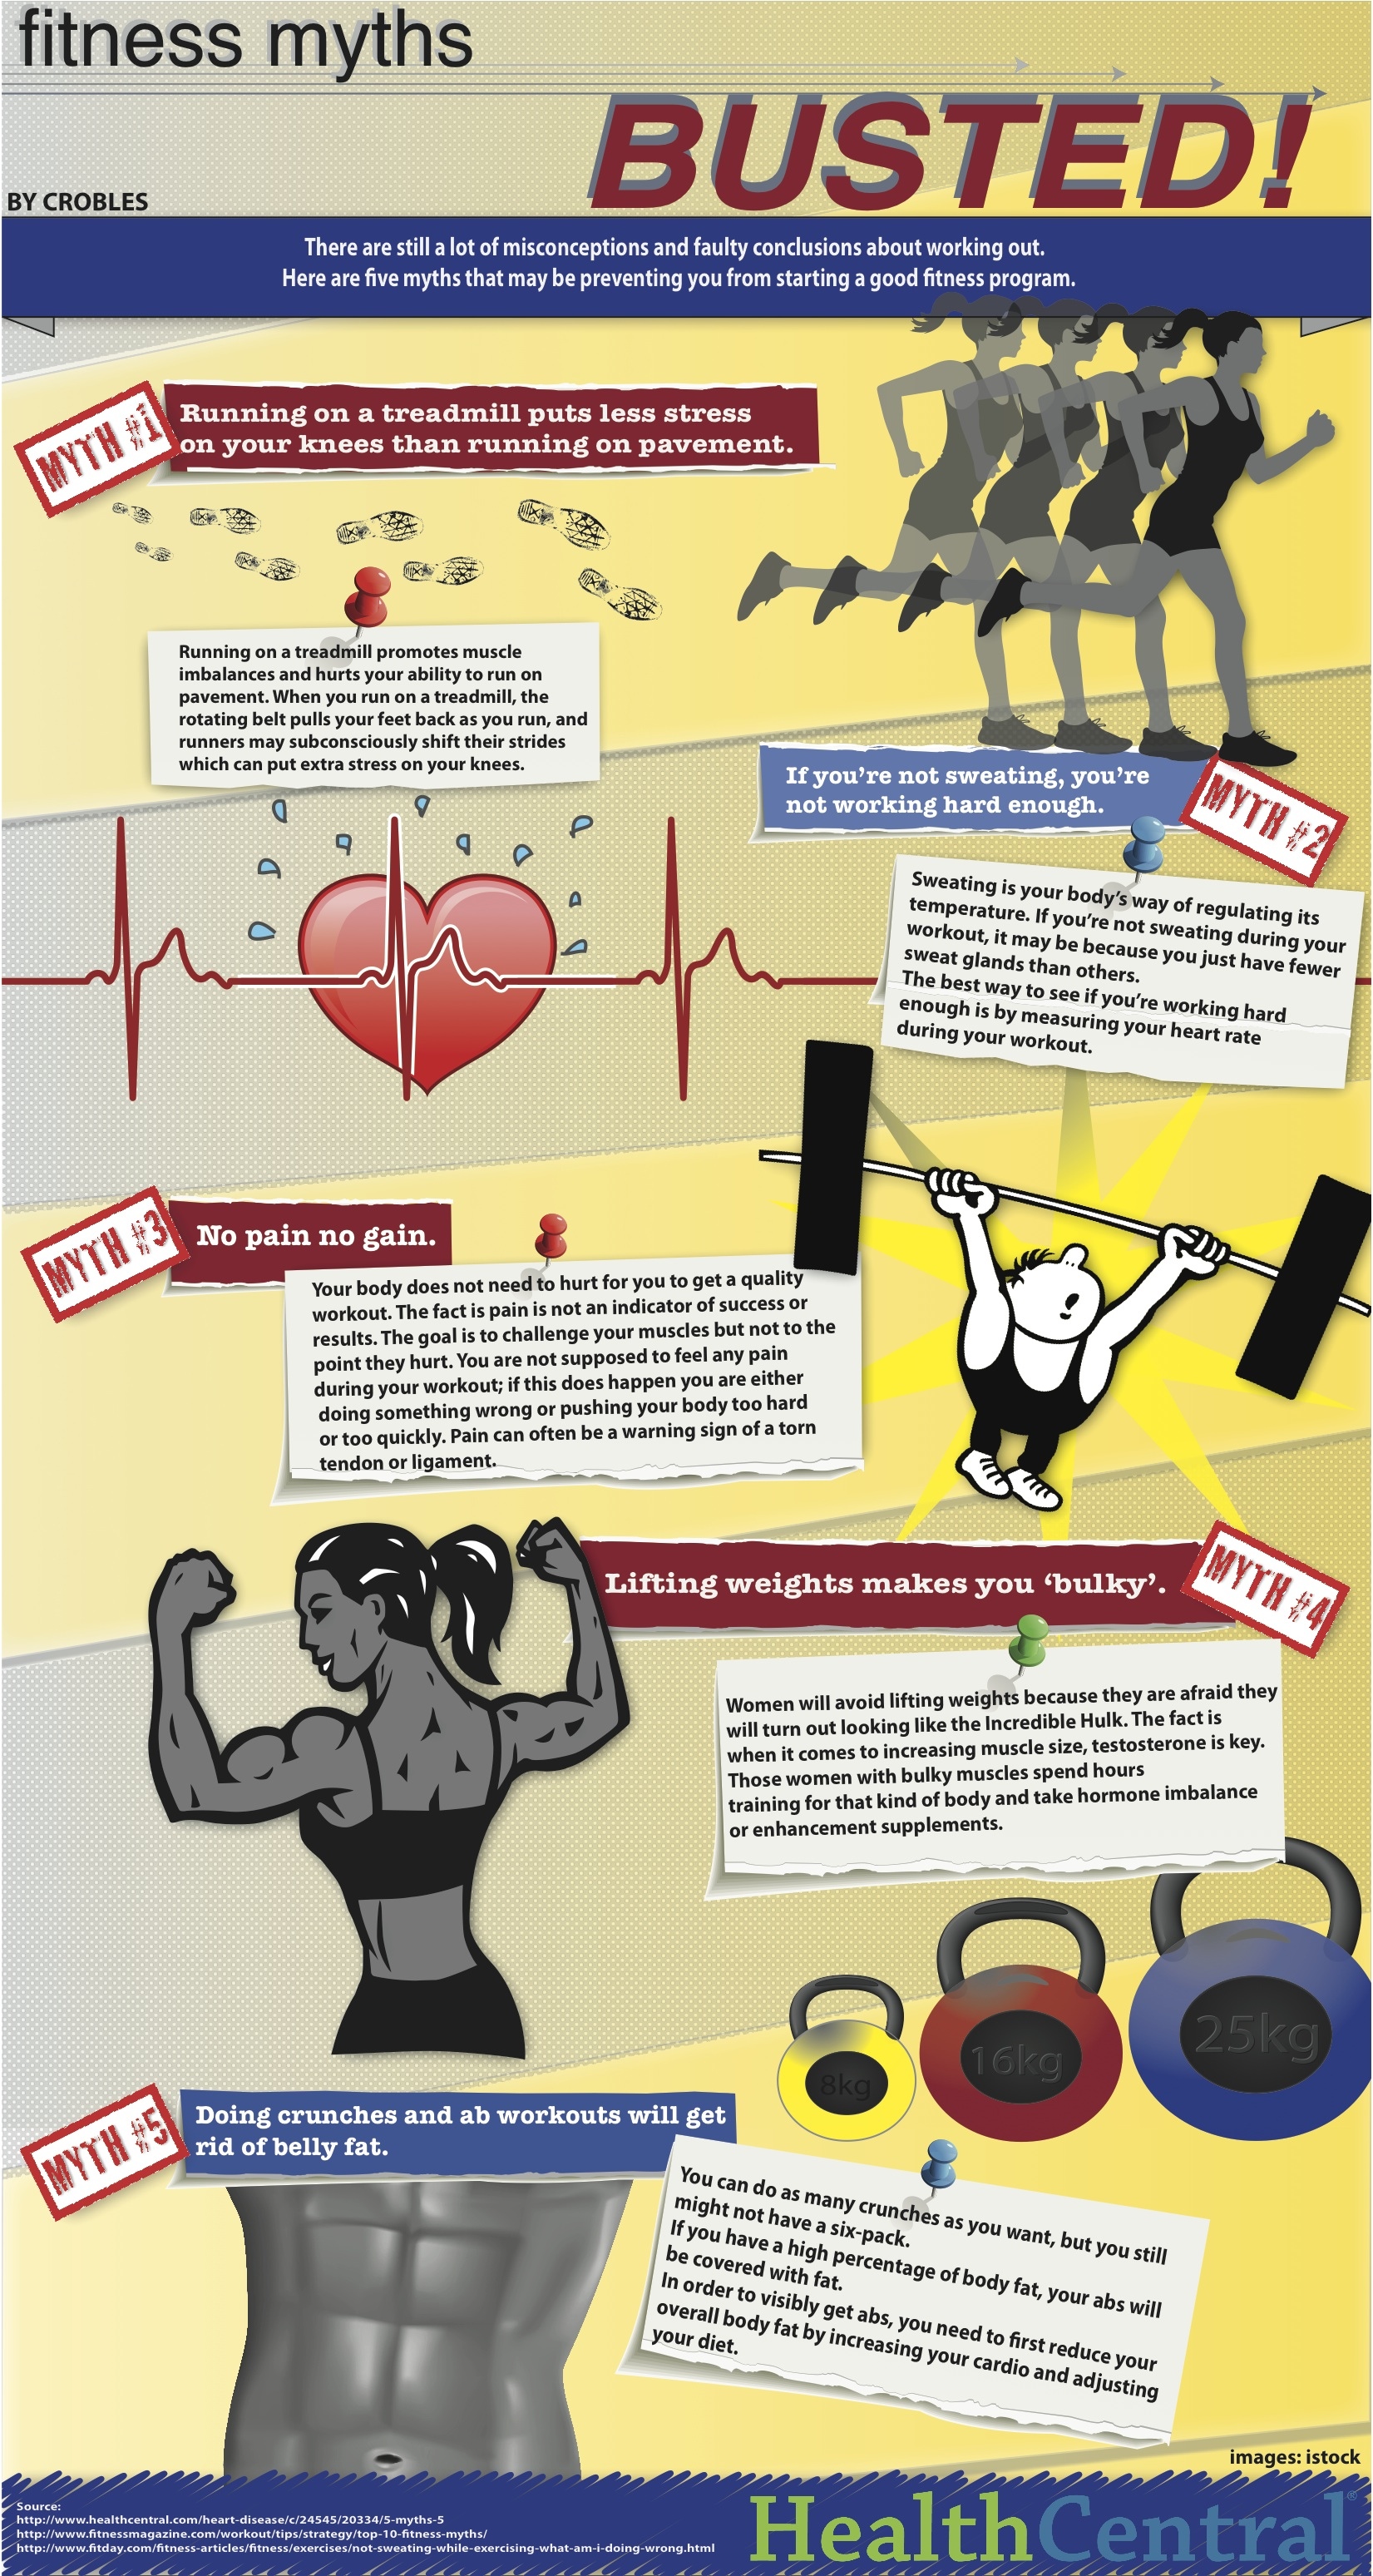 fitness-myths-busted